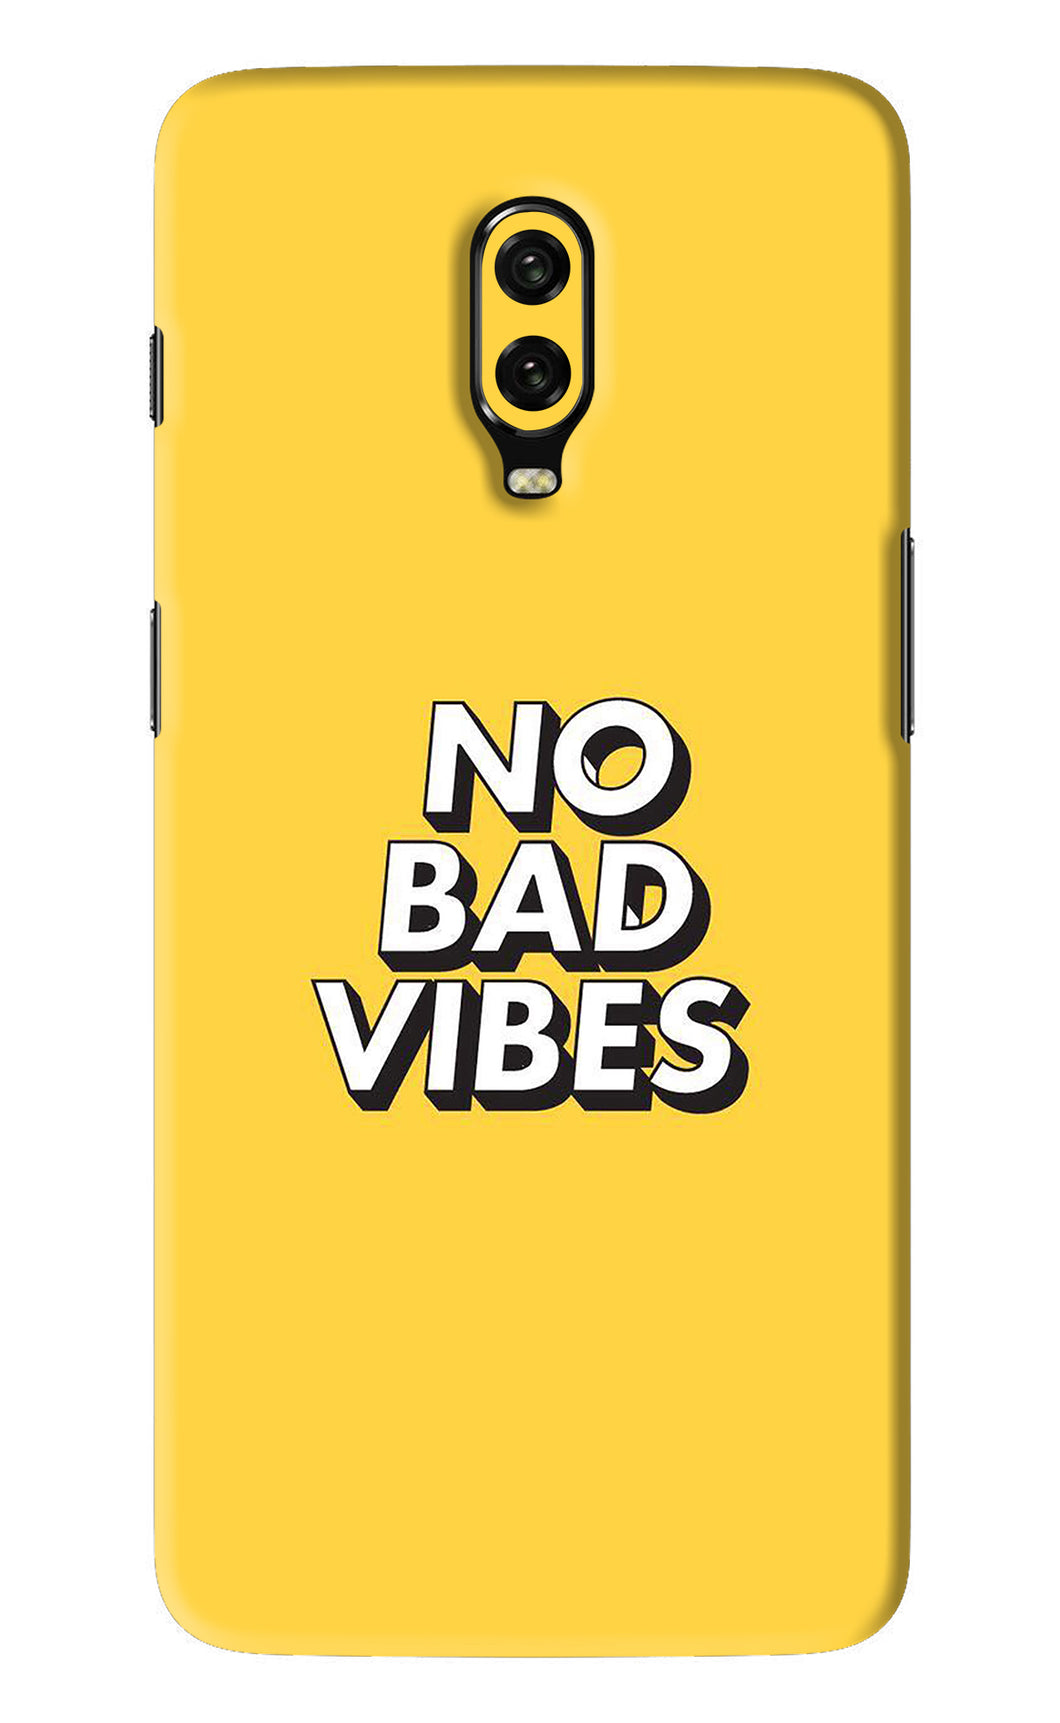 No Bad Vibes OnePlus 6T Back Skin Wrap